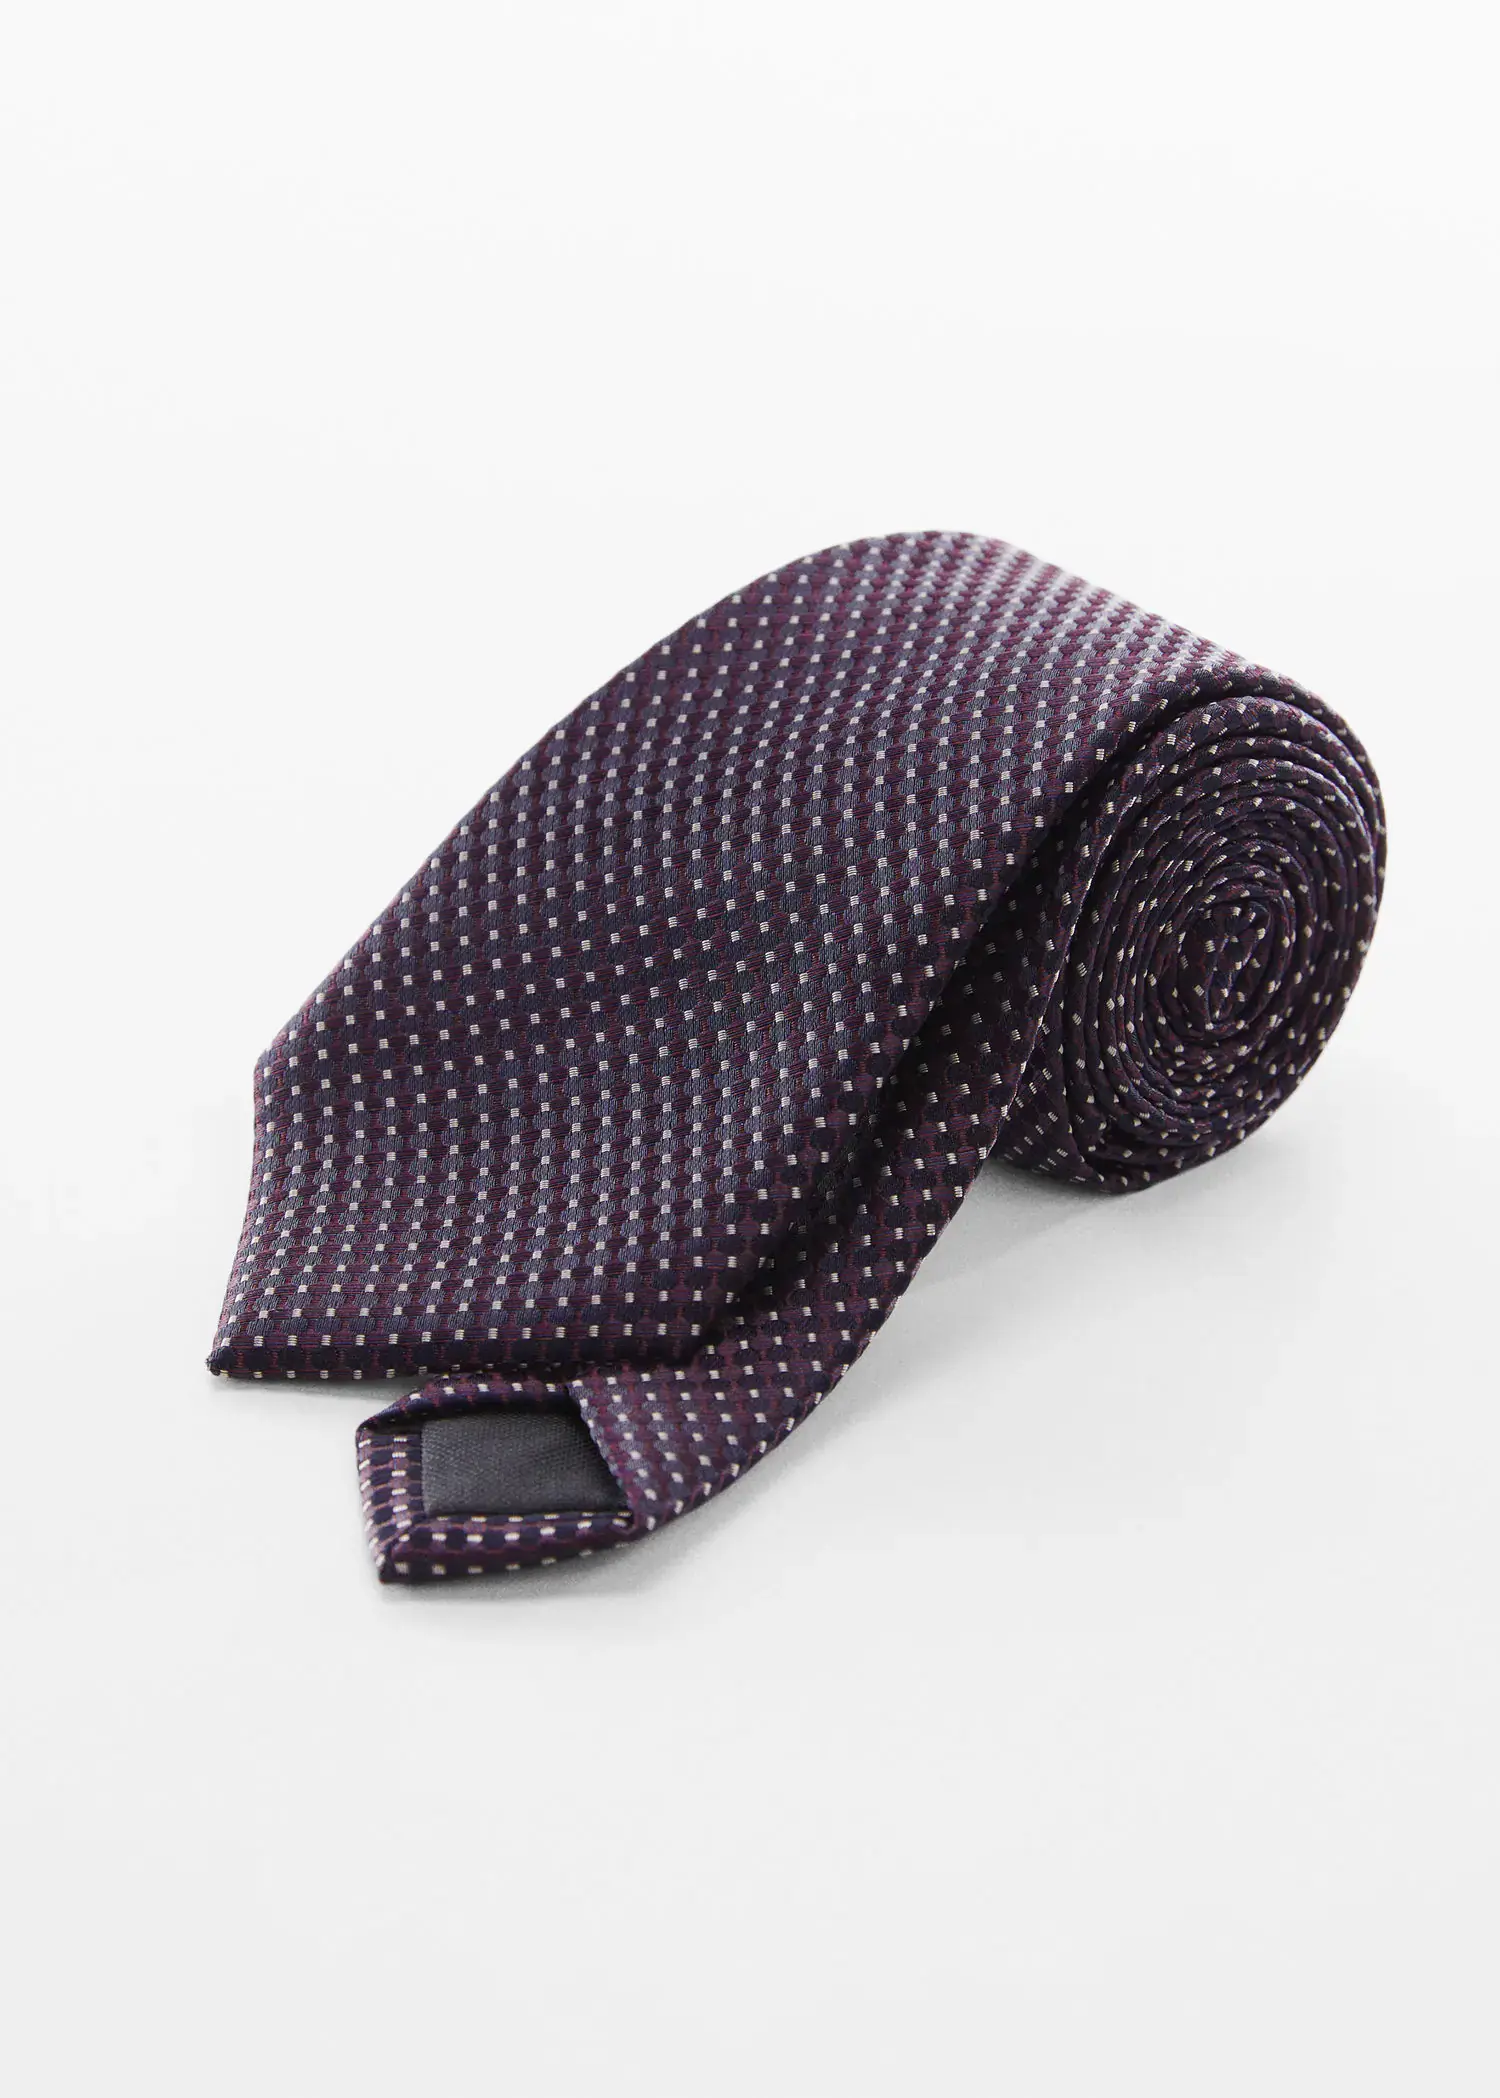 Mango Tie with micro polka-dot structure. a purple tie with white polka dots on it. 